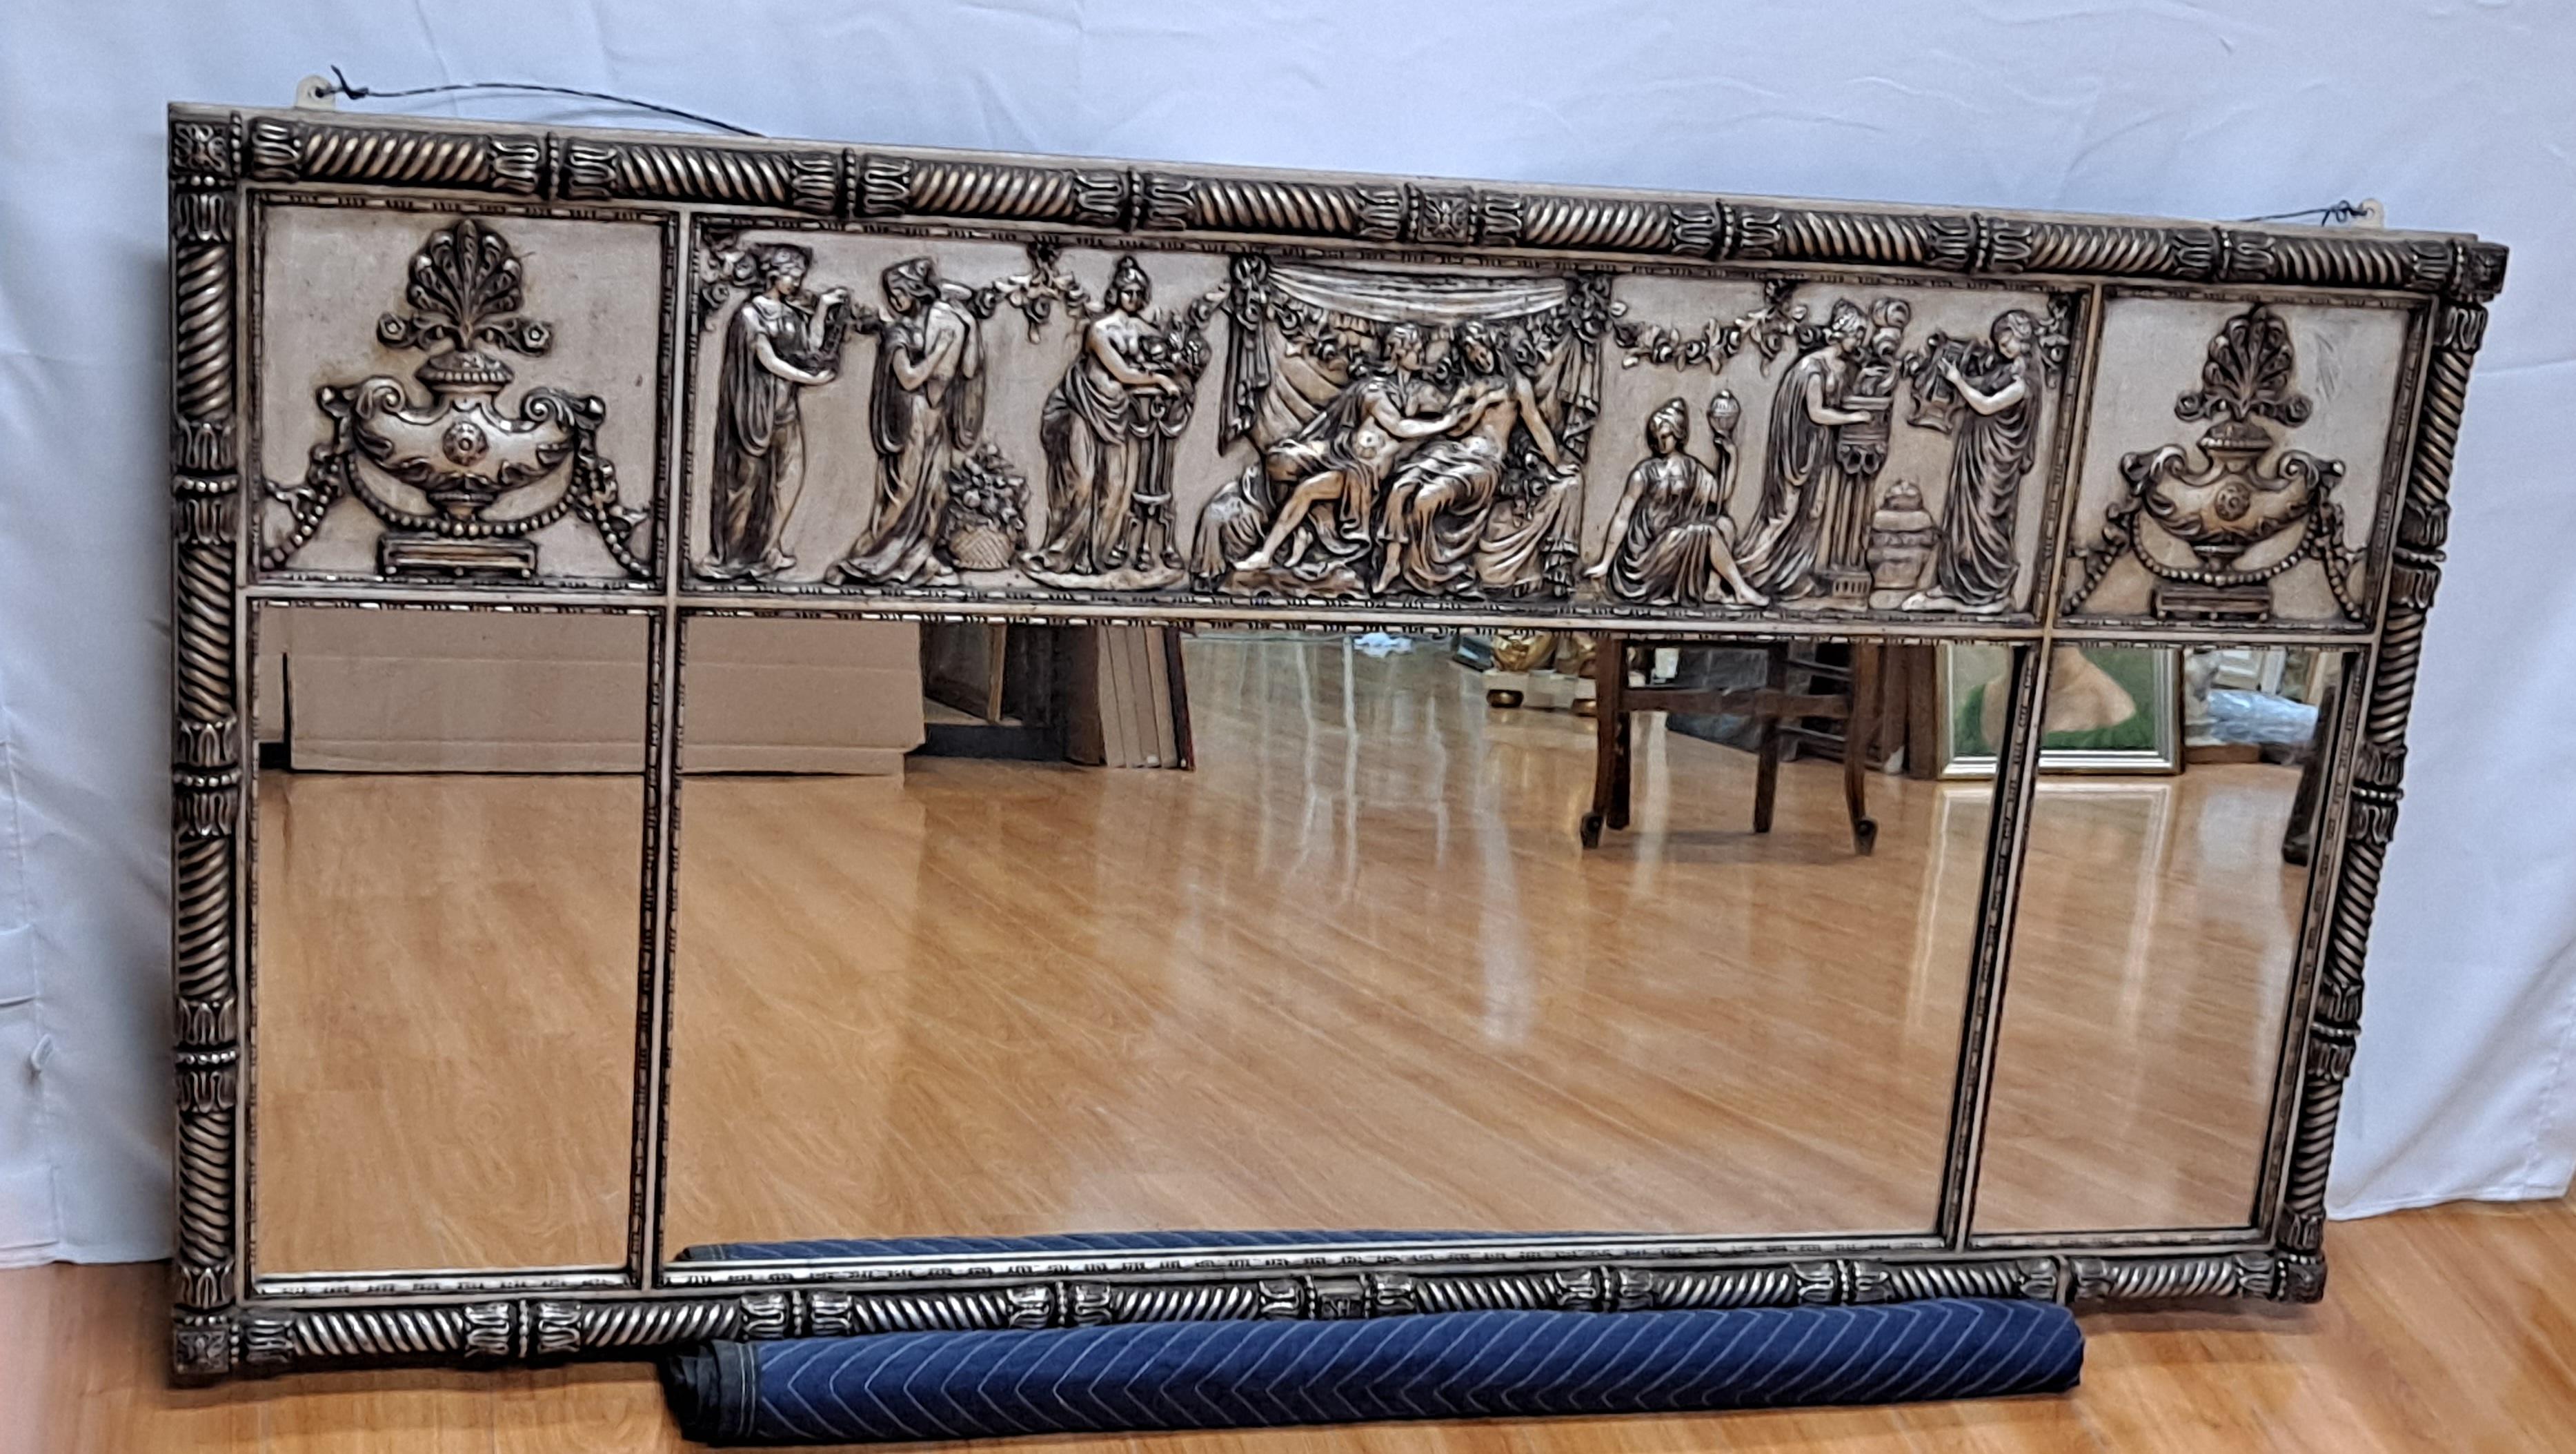 Large Carved Wood Silvered Classical Mirror With Roman-Style Decoration

32h x 2.25d x 62l